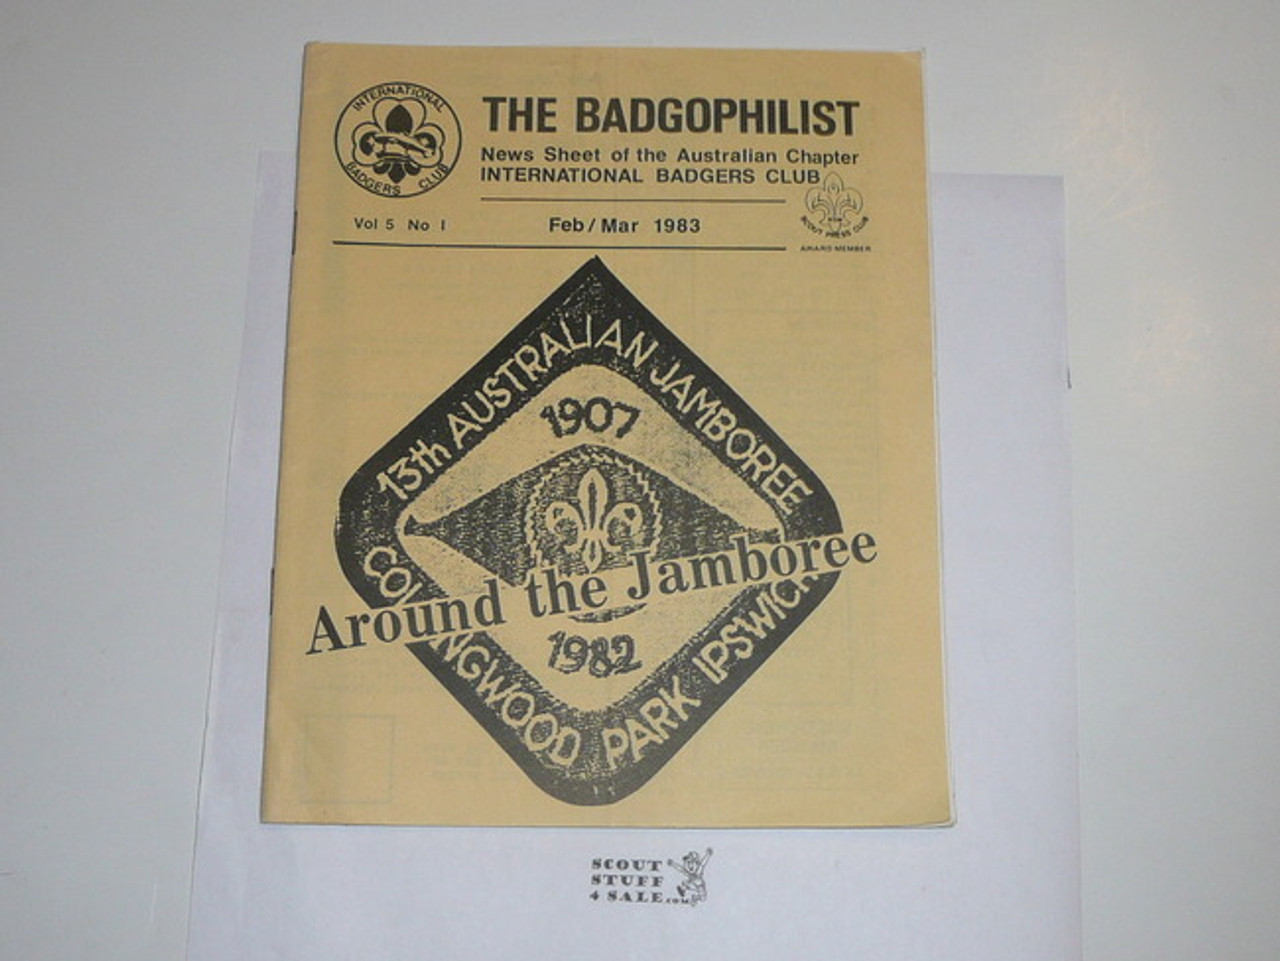 The Badgophilist, Newsletter of the Australian Branch of the International Badger clubb, 1983 February/March, Vol 5 #1